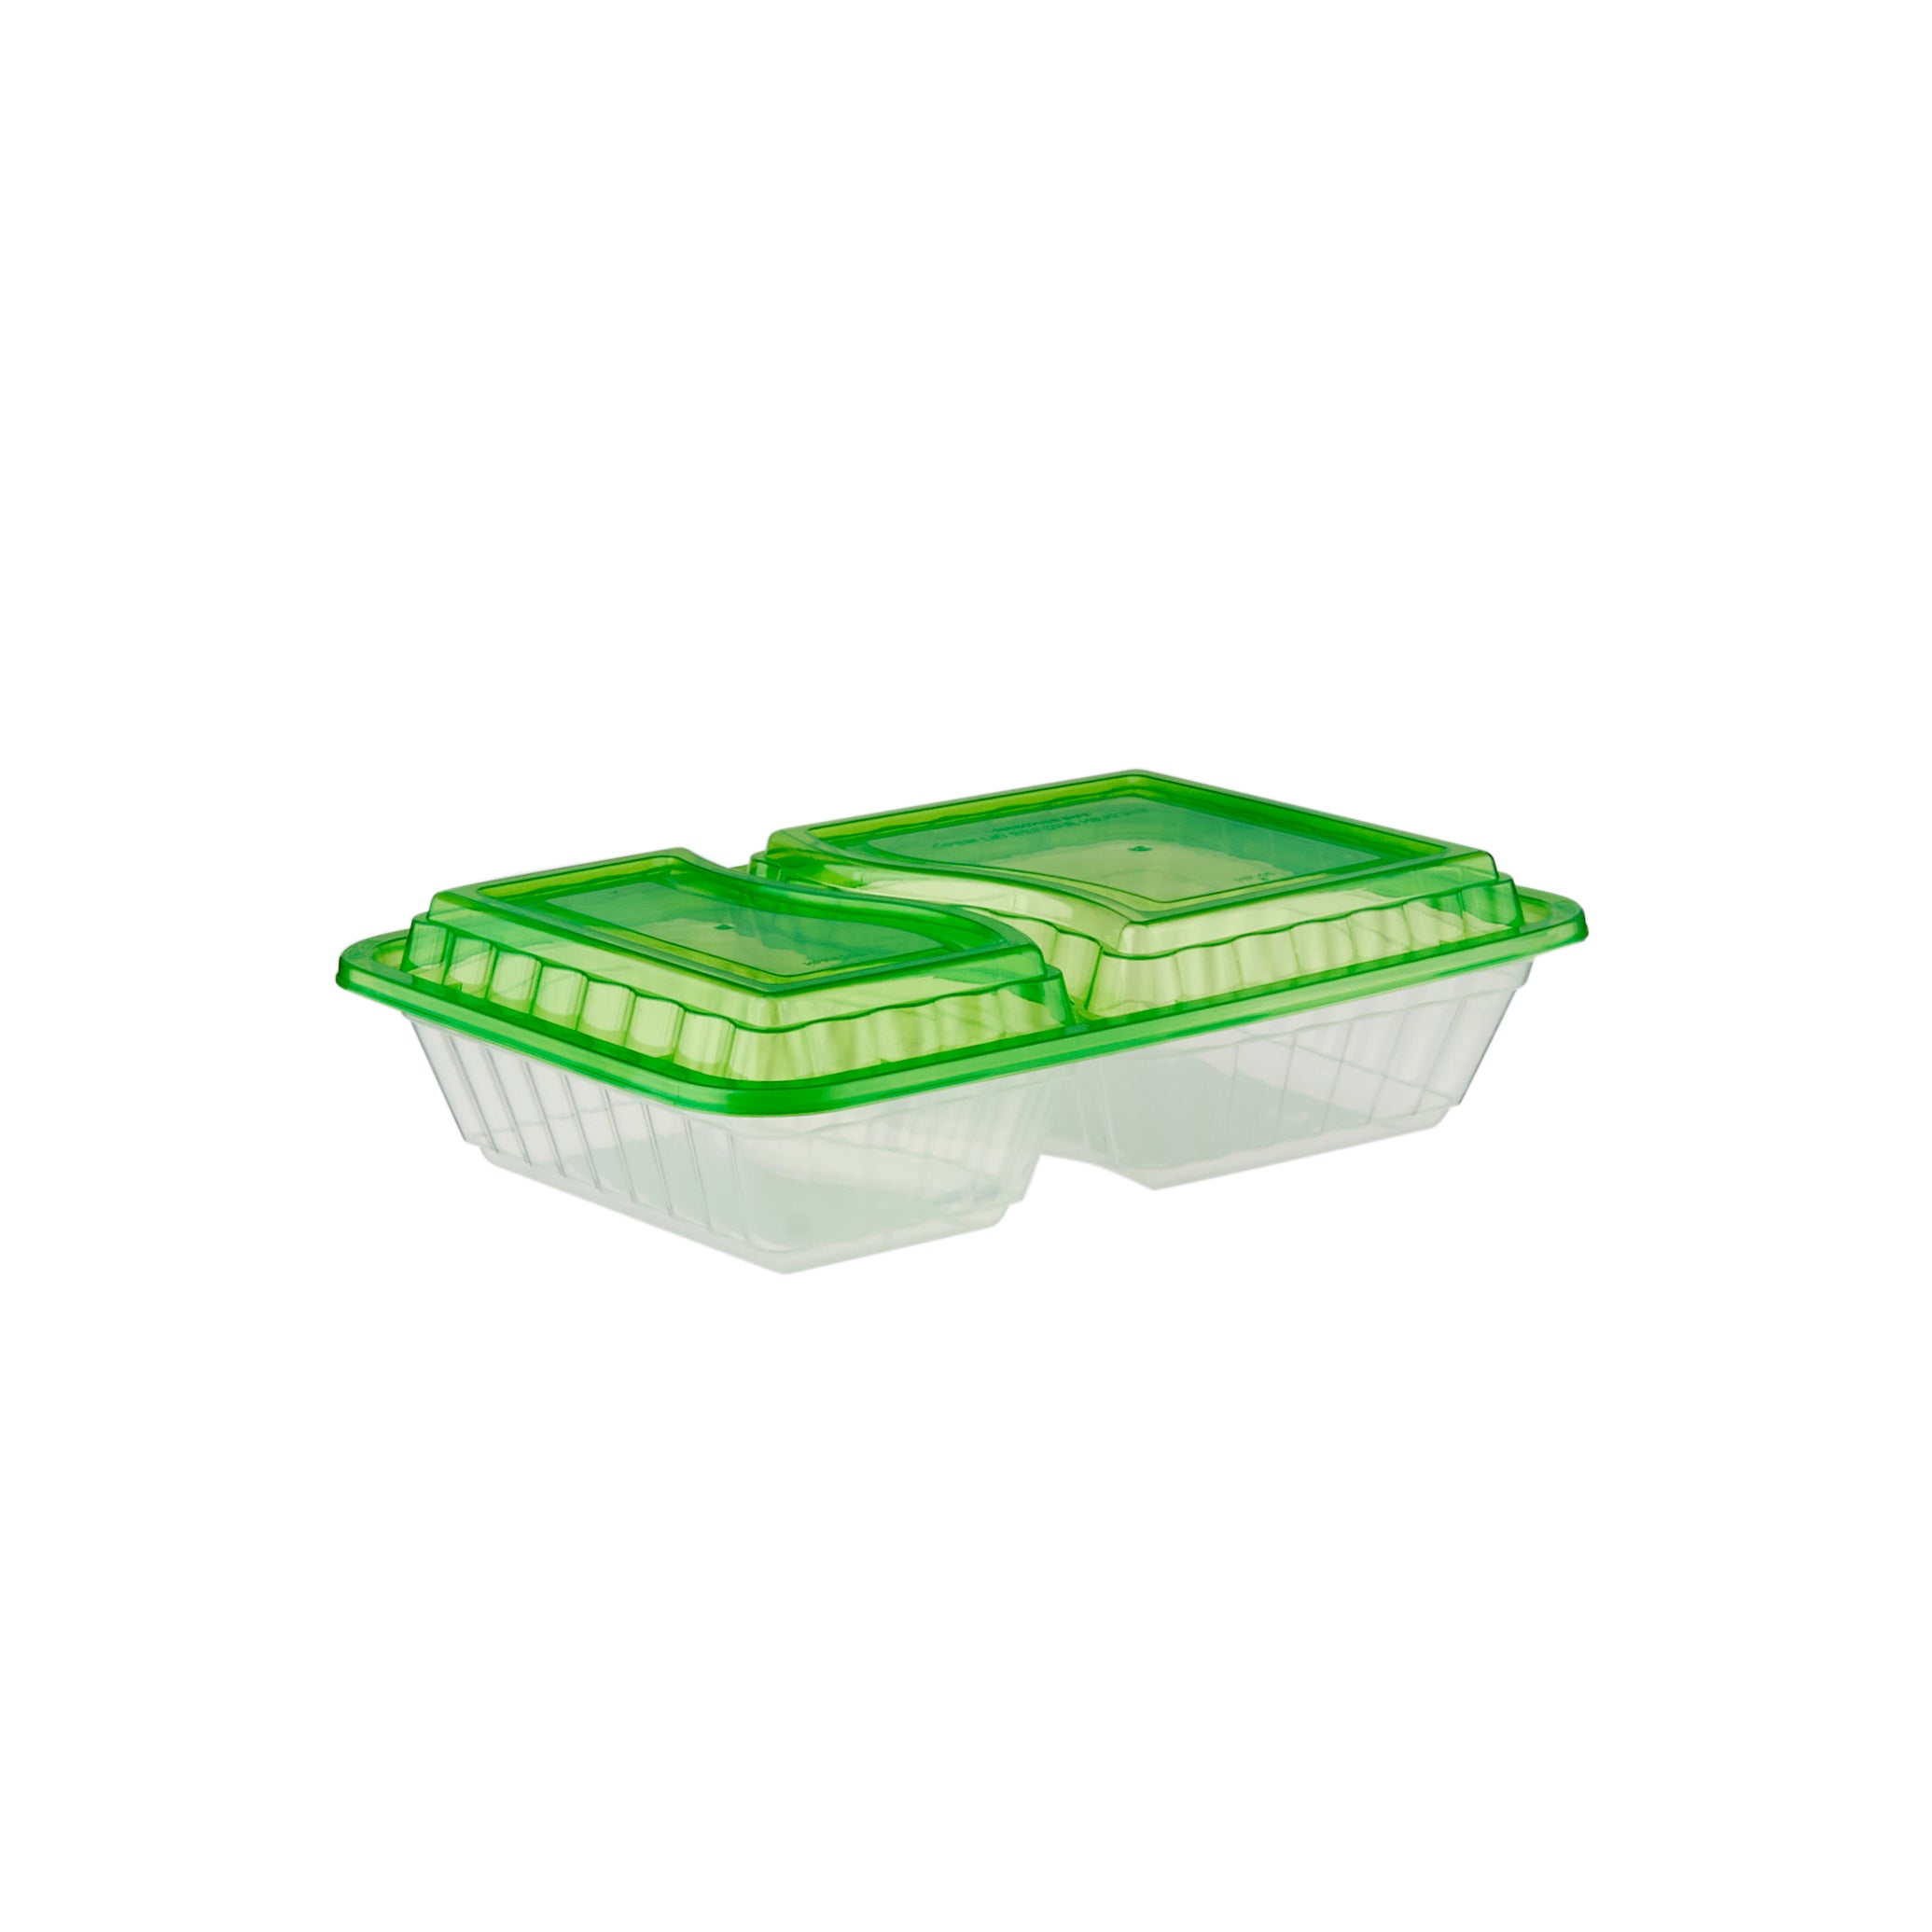  Clear Microwavable Container with color Lids